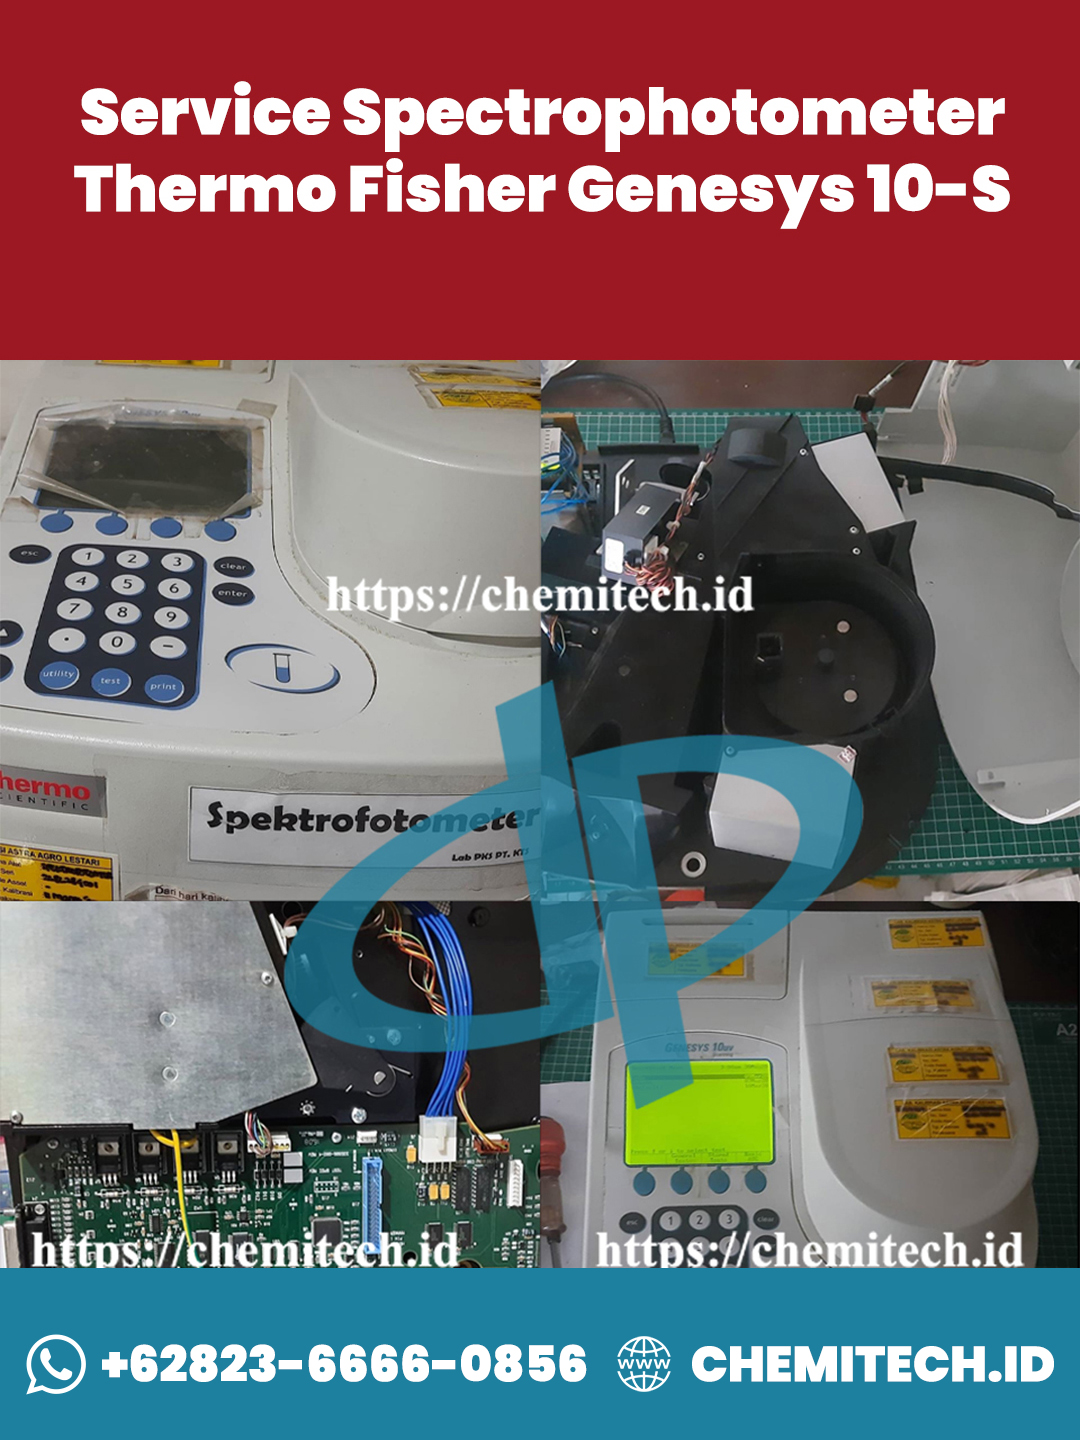 Web Stories - Service Spectrophotometer Thermo Fisher Genesys 10-S